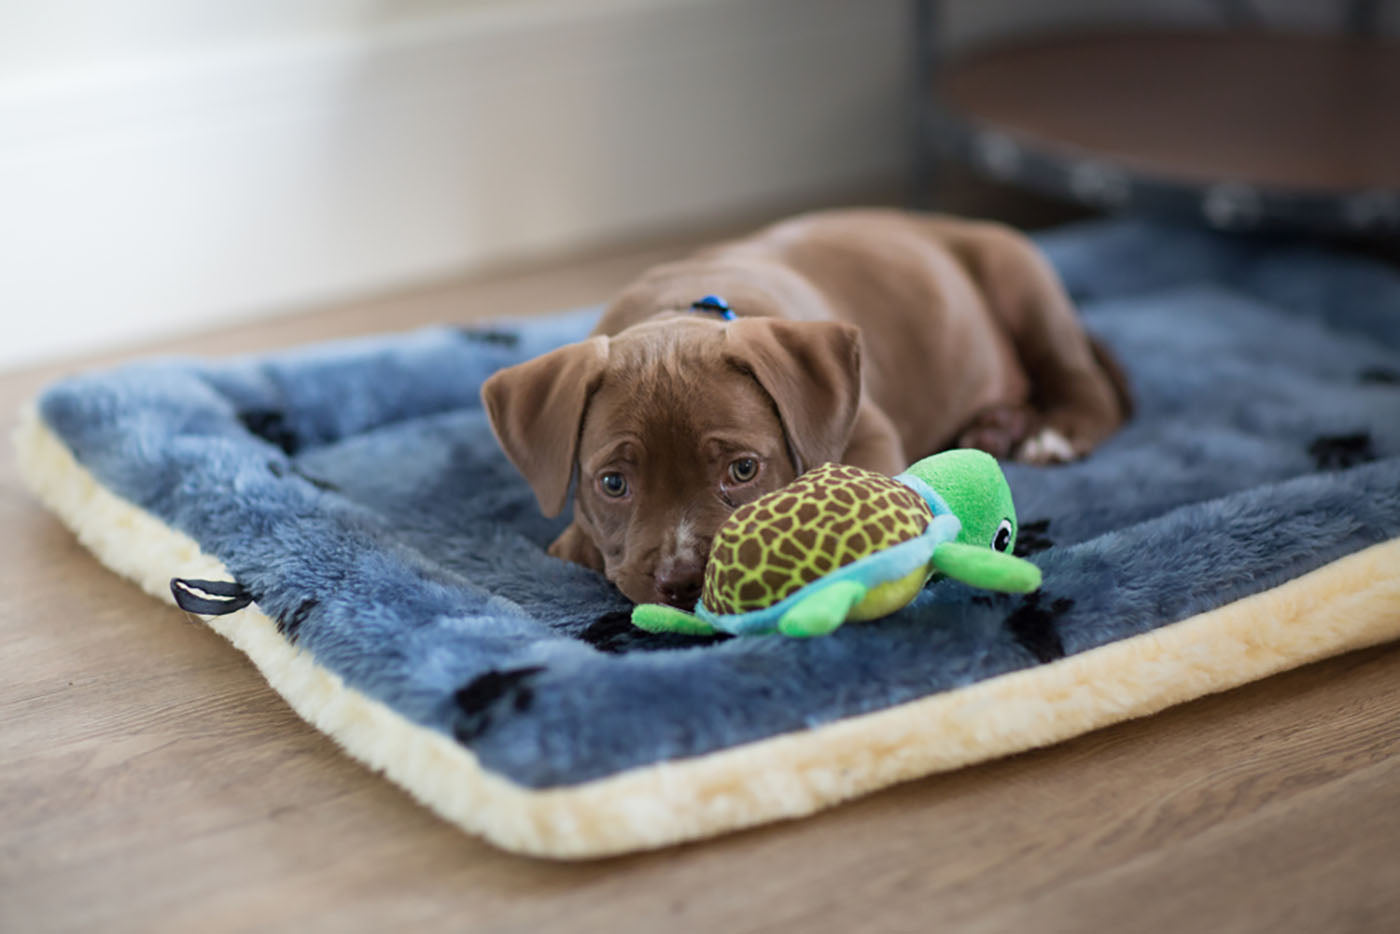 Spoil your dog with these toys, treats, beds and more - Good